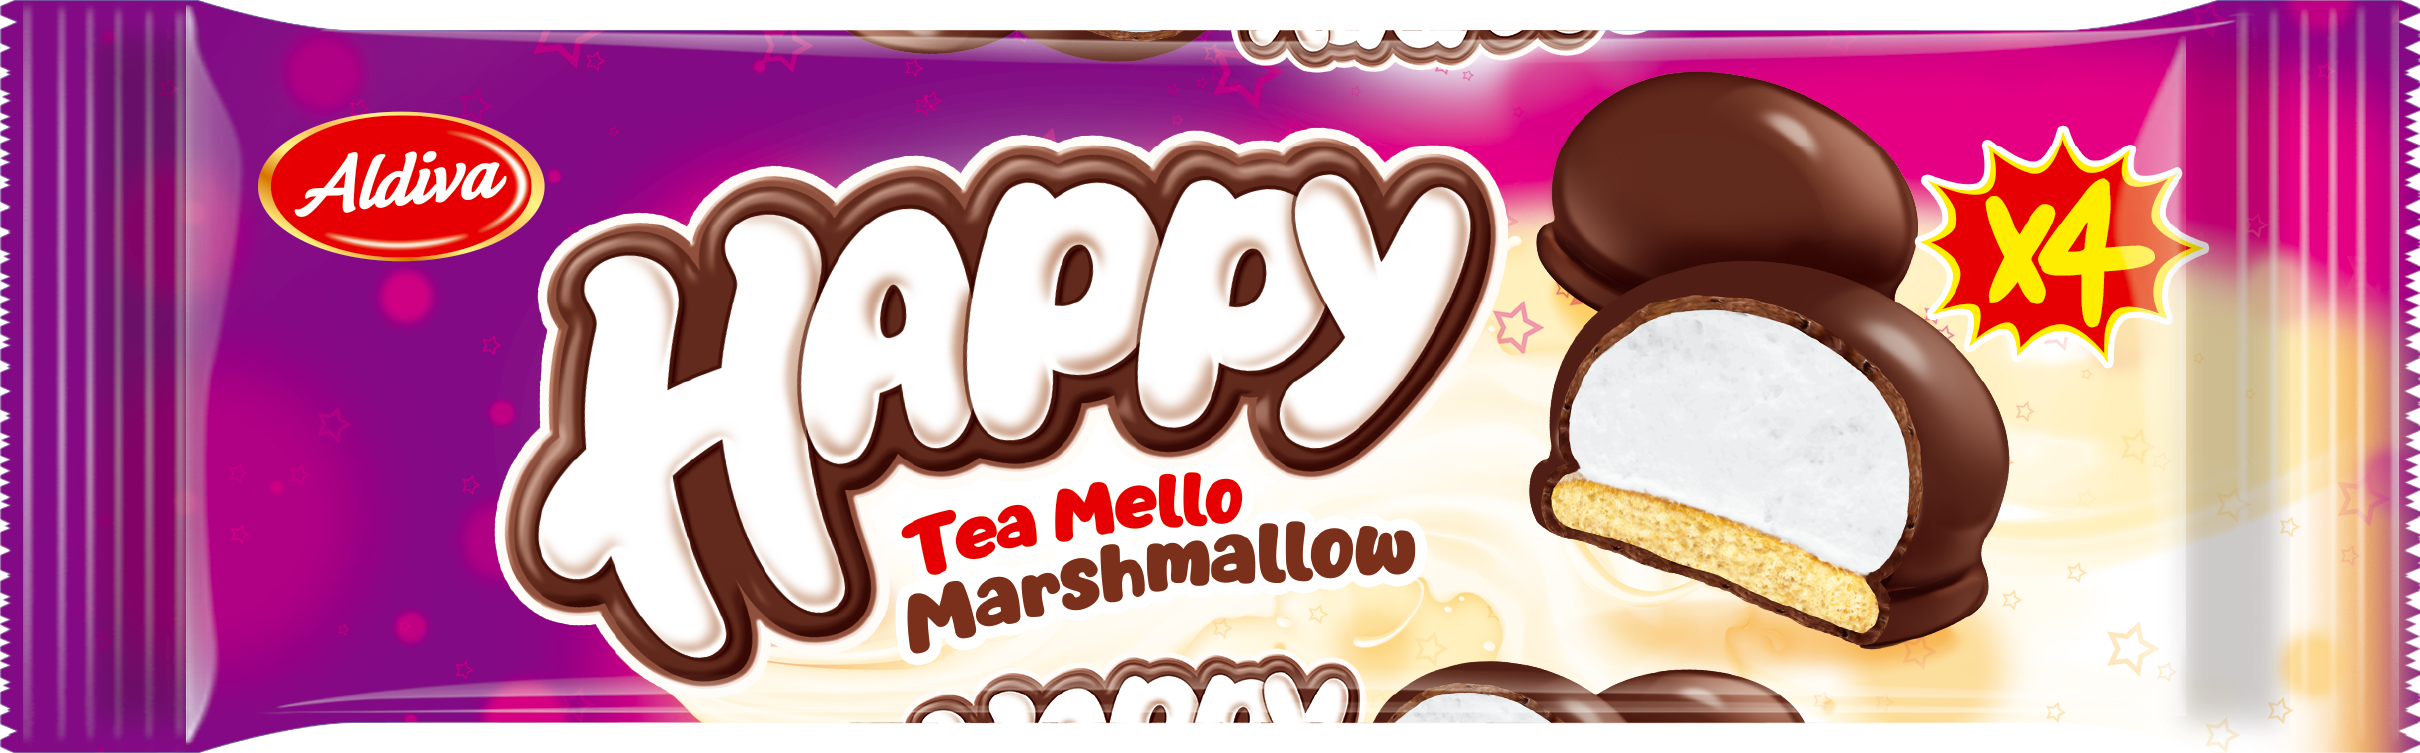 Happy Tea Cake Cocoa Coated Marshmallow Biscuits 